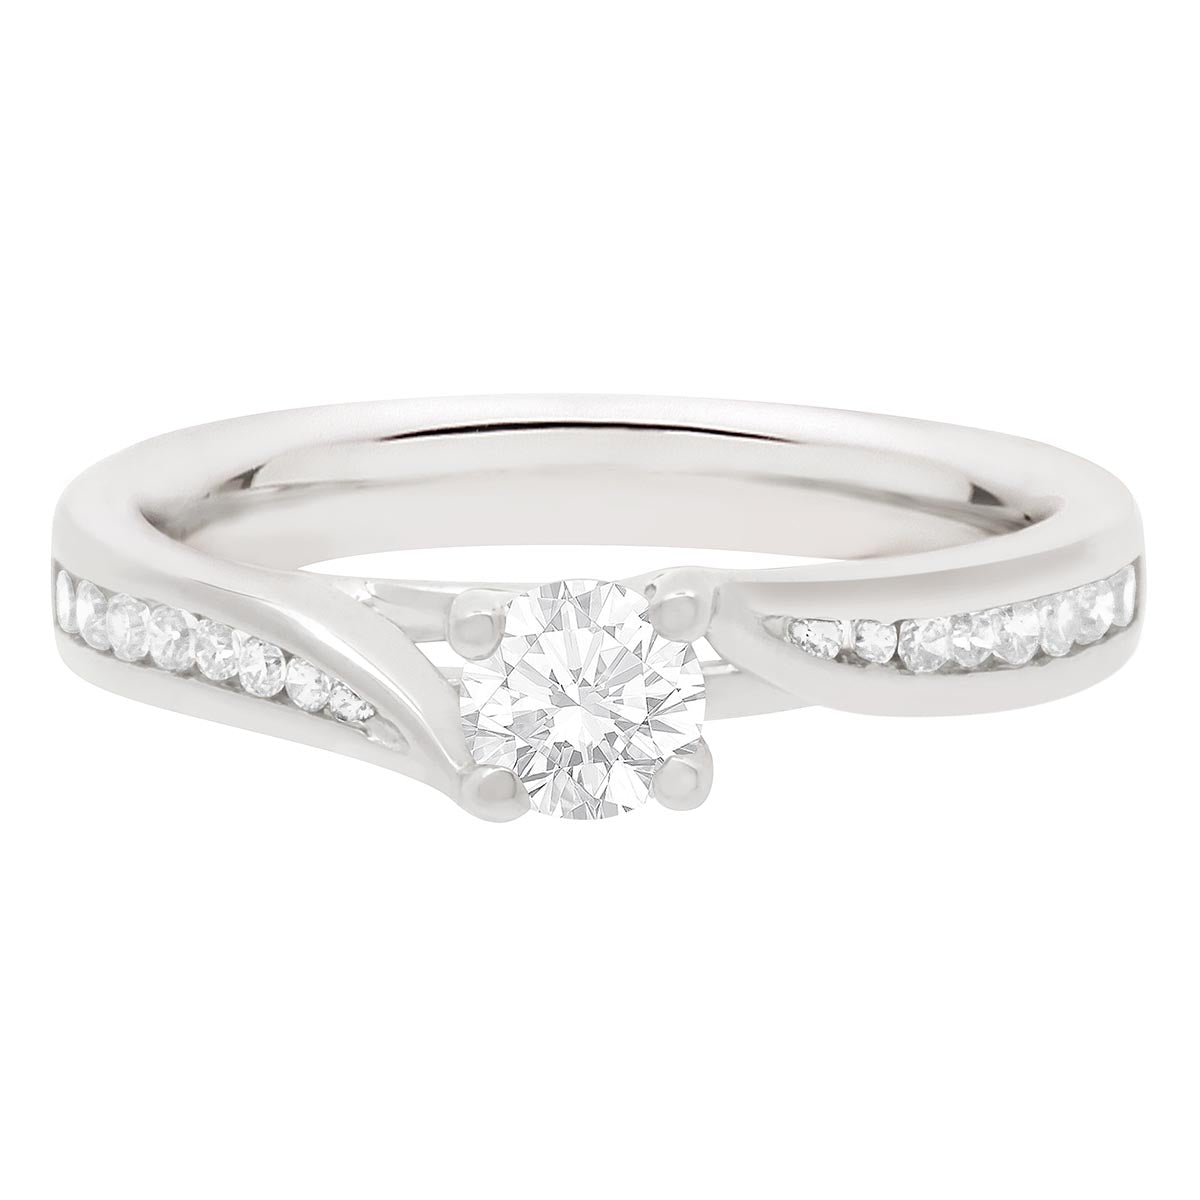 Crossover Band Diamond Ring made from platinum